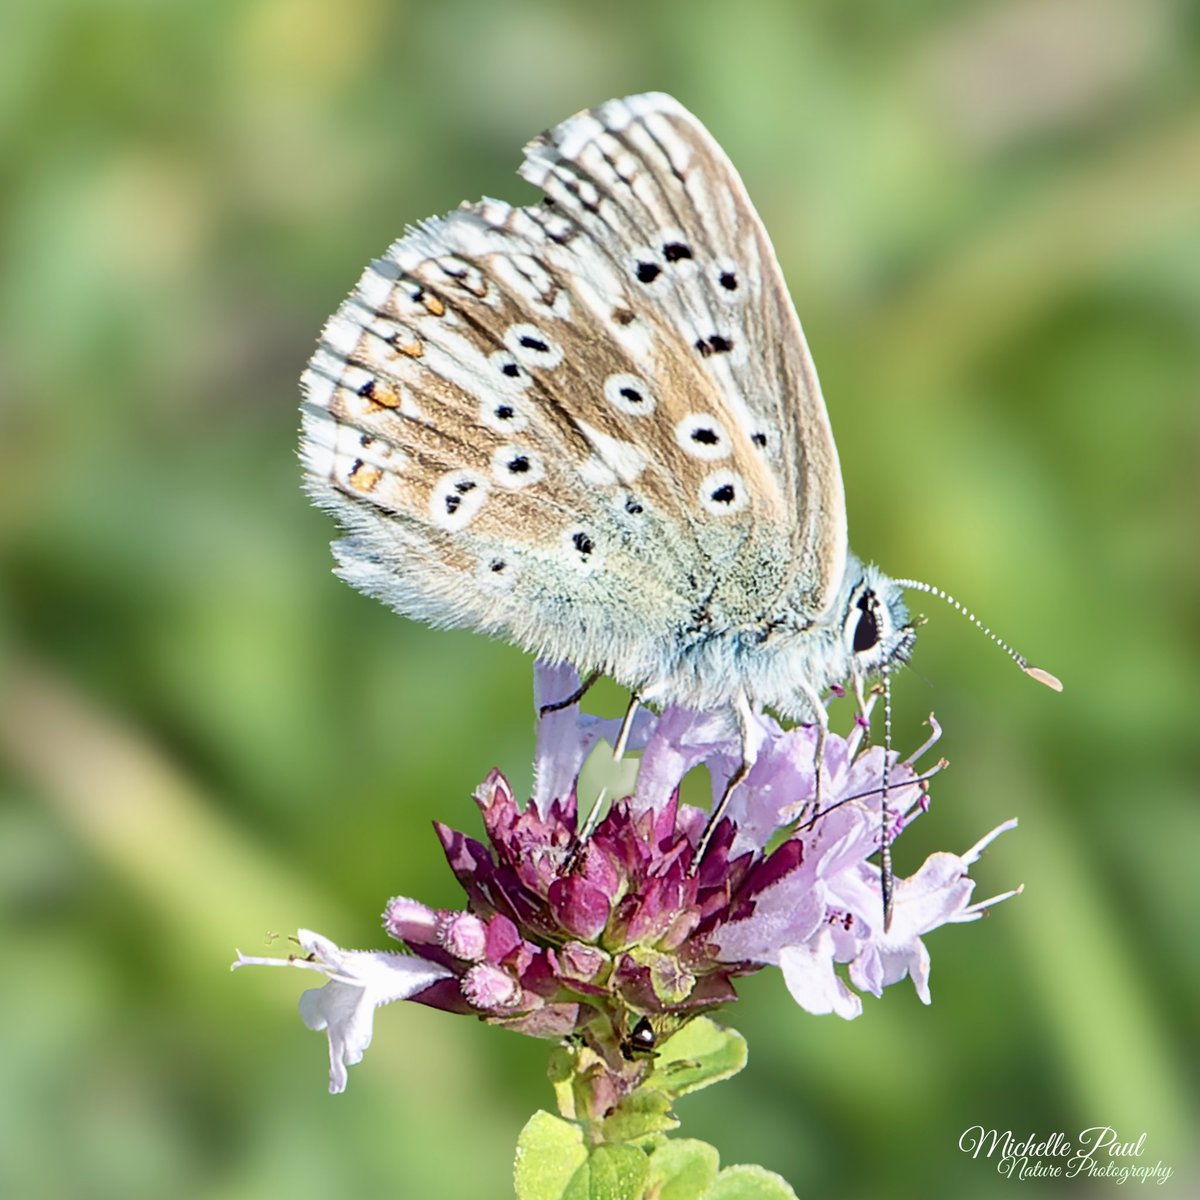 I have so many lovely butterfly photos from the summer that I haven’t posted yet, such as this Chalkhill Blue. More to come! 🦋 

#TwitterNatureCommunity #TwitterNaturePhotography #nikonphotography #nature #Butterflies #insects #Lepidoptera #Lycaenidae #ThrowbackThursday #summer